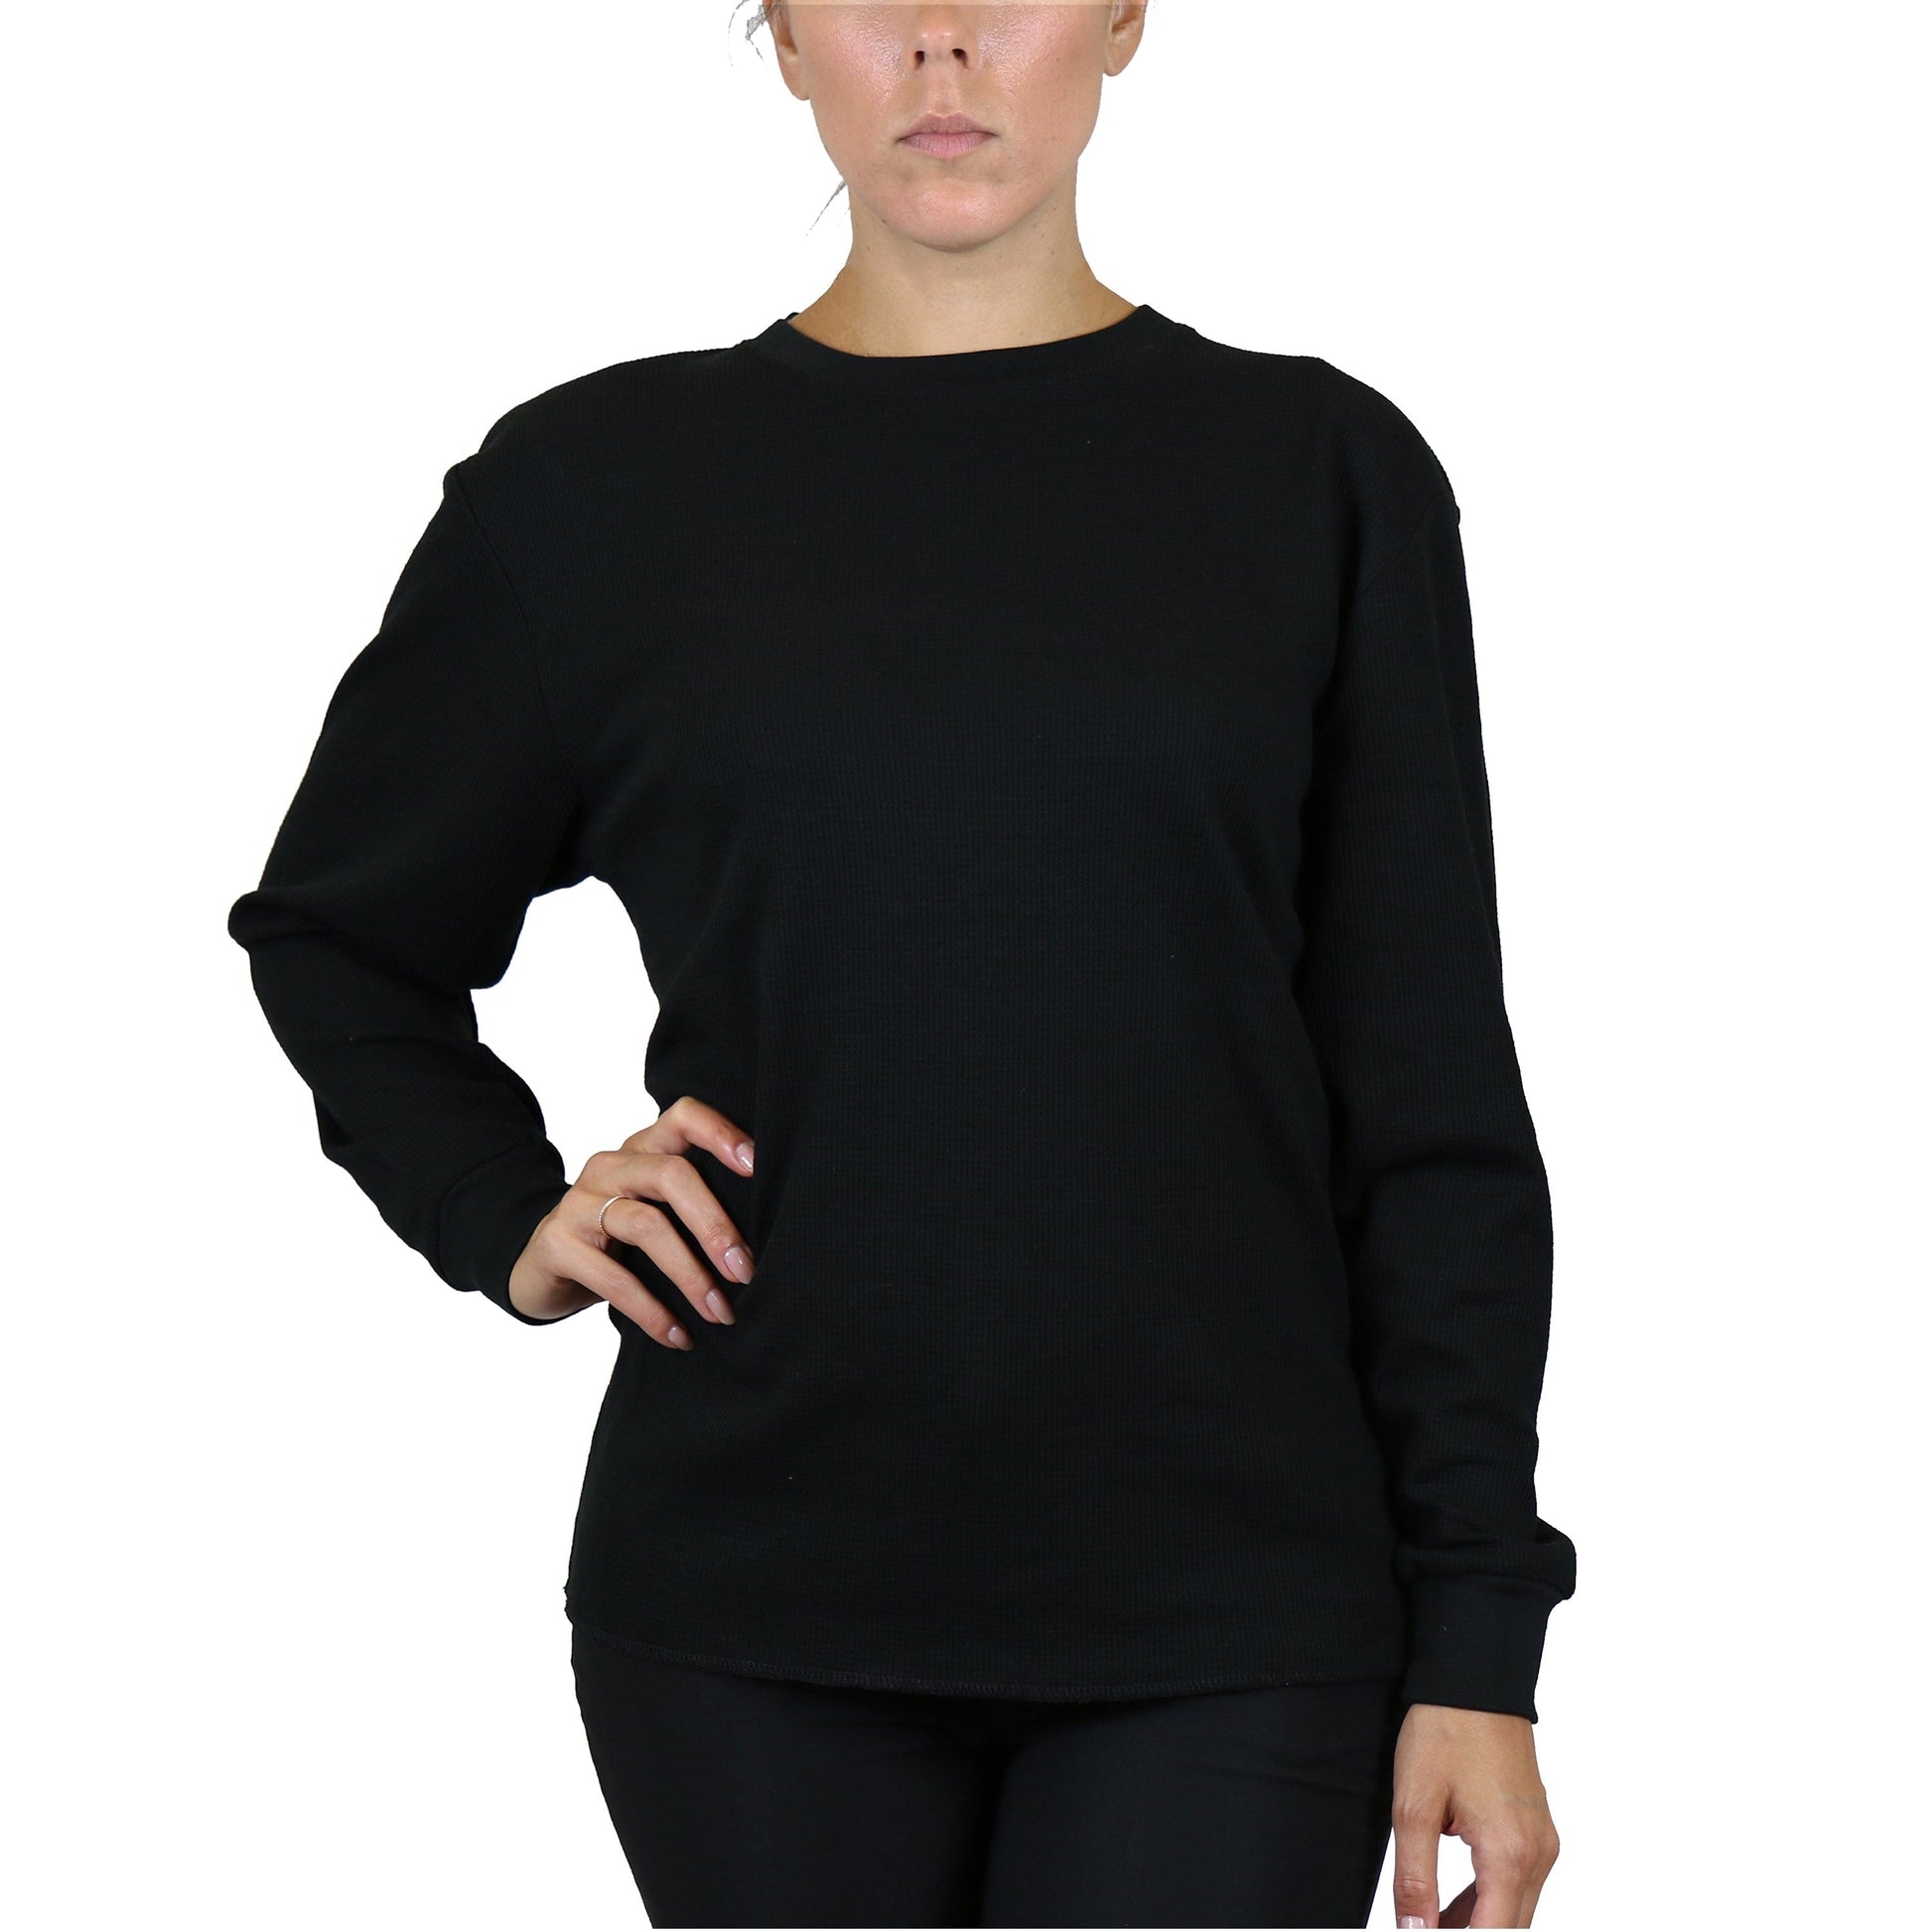 Women's Long Sleeve Oversize Loose Fit Thermal Shirts (Sizes, S-5XL)